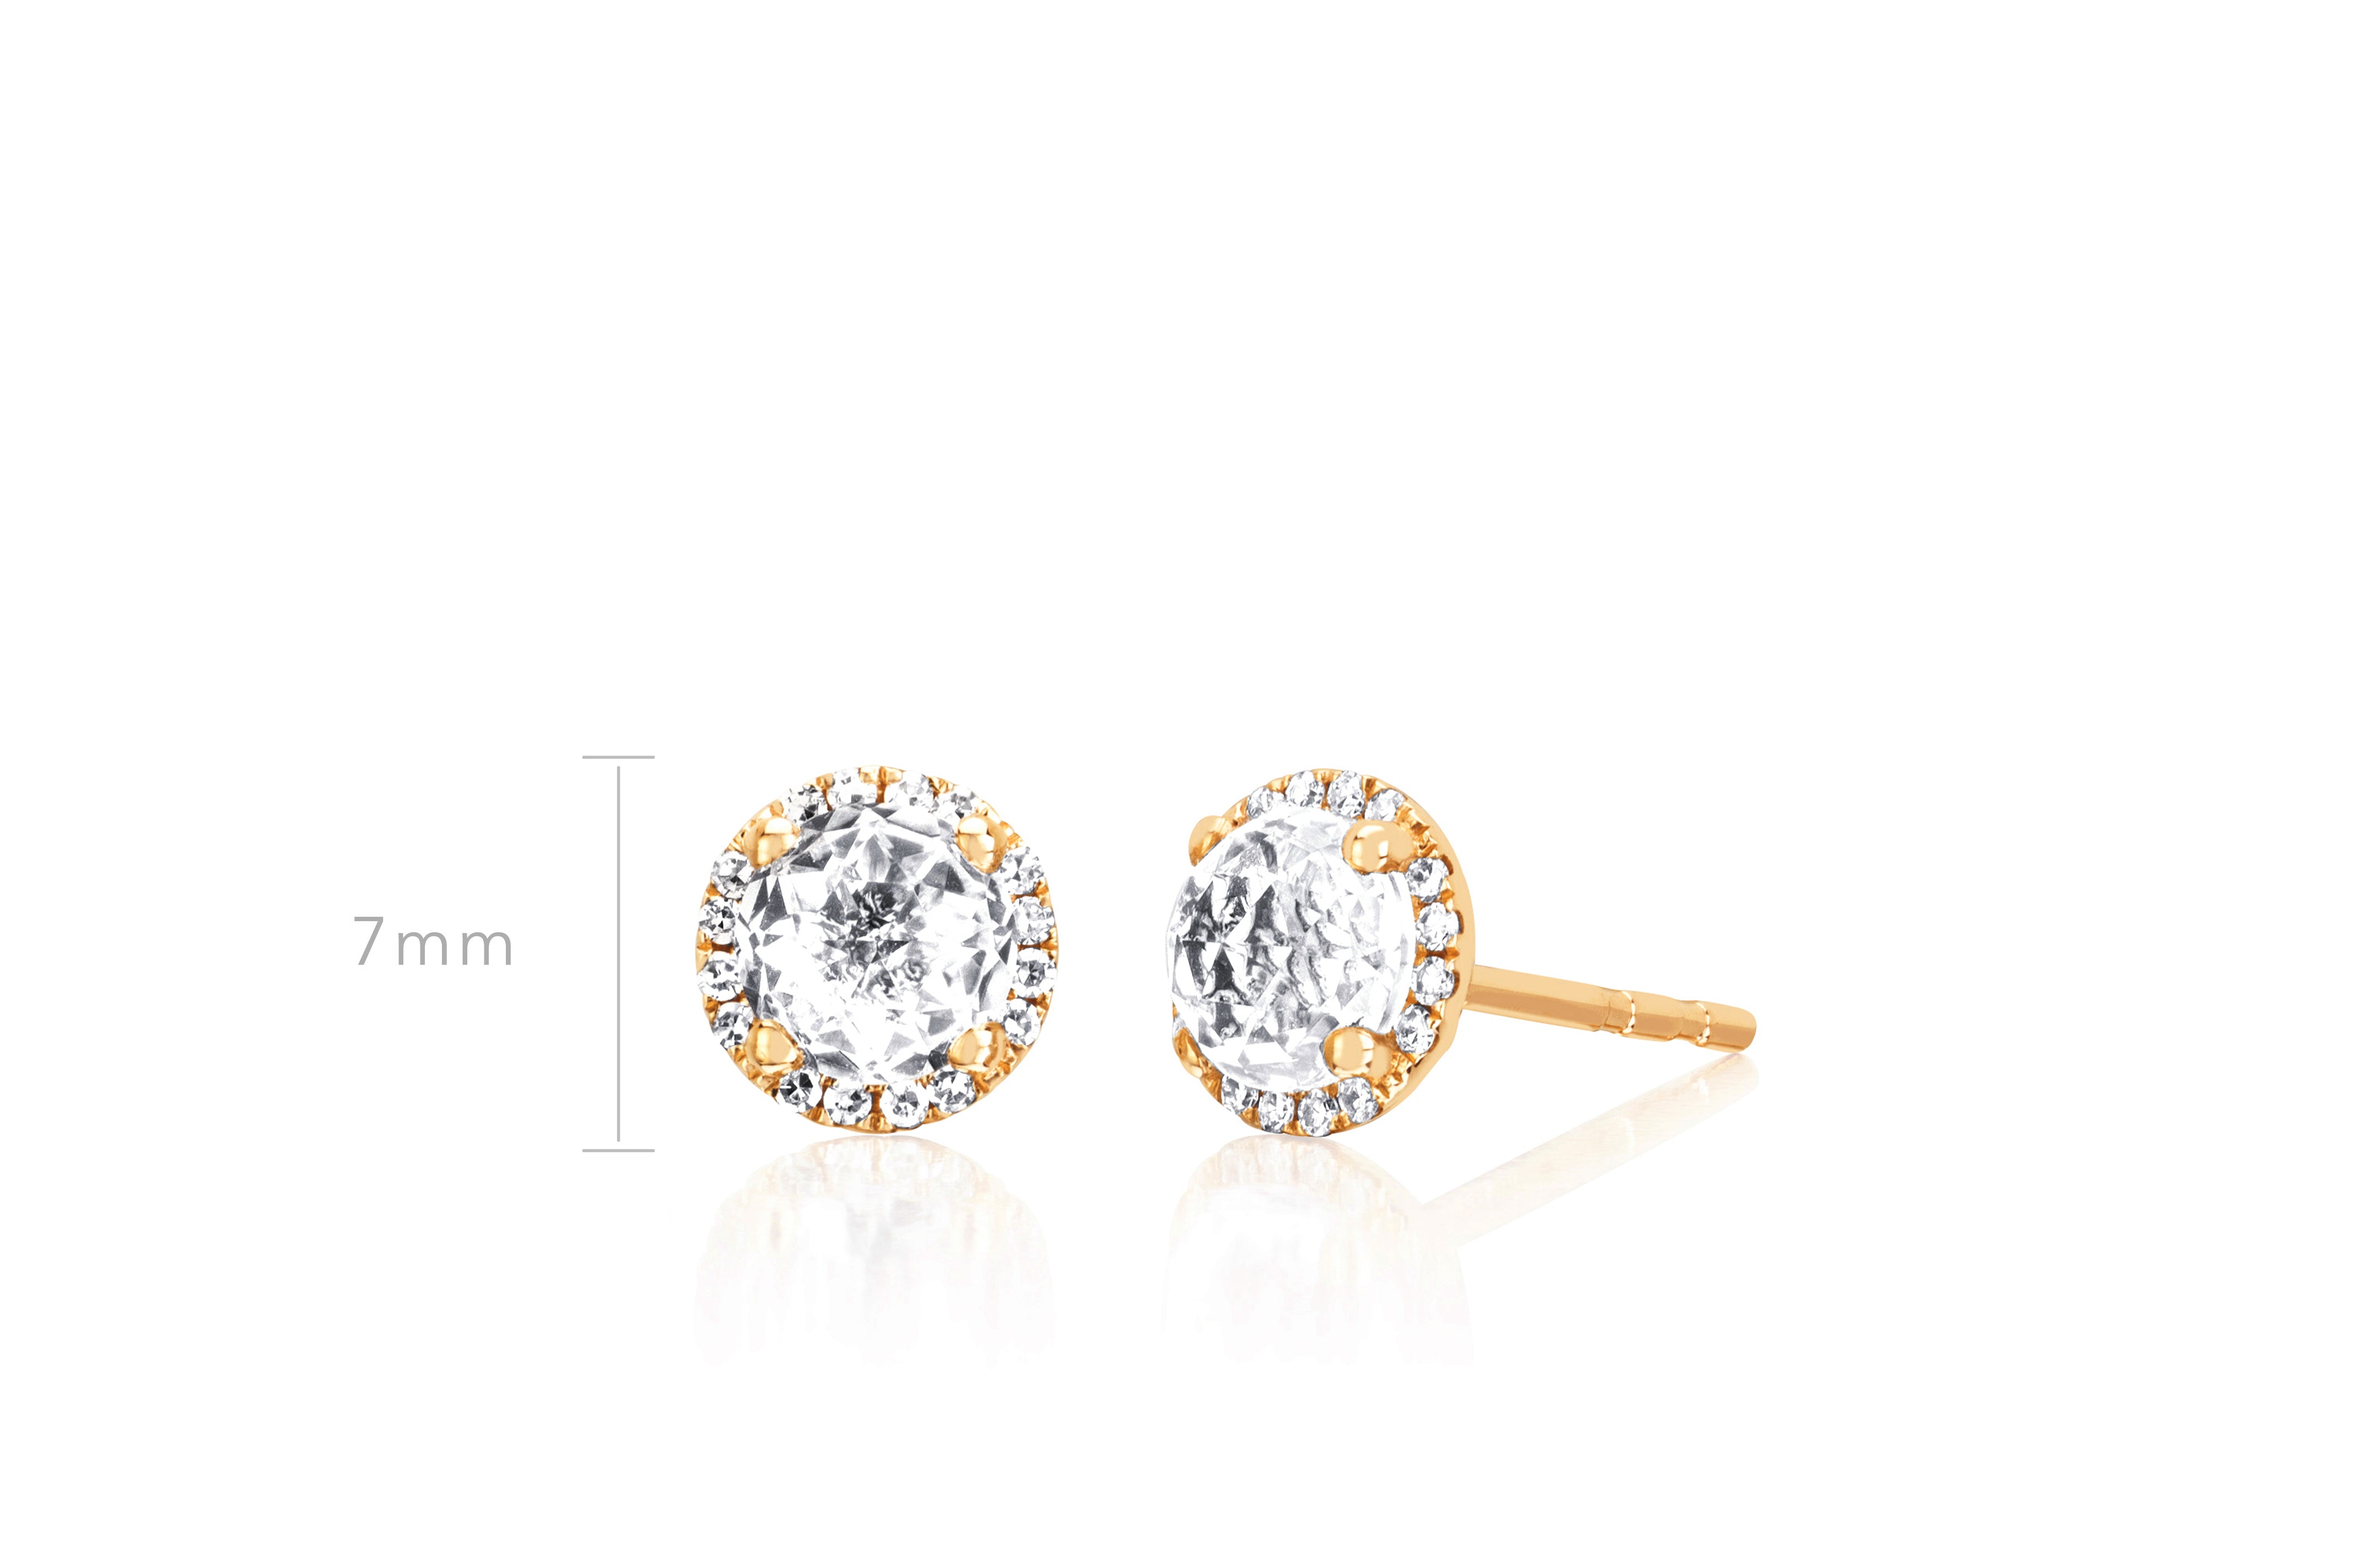 Diamond White Topaz Stud Earring in 14k yellow gold with size measurement of 7mm height